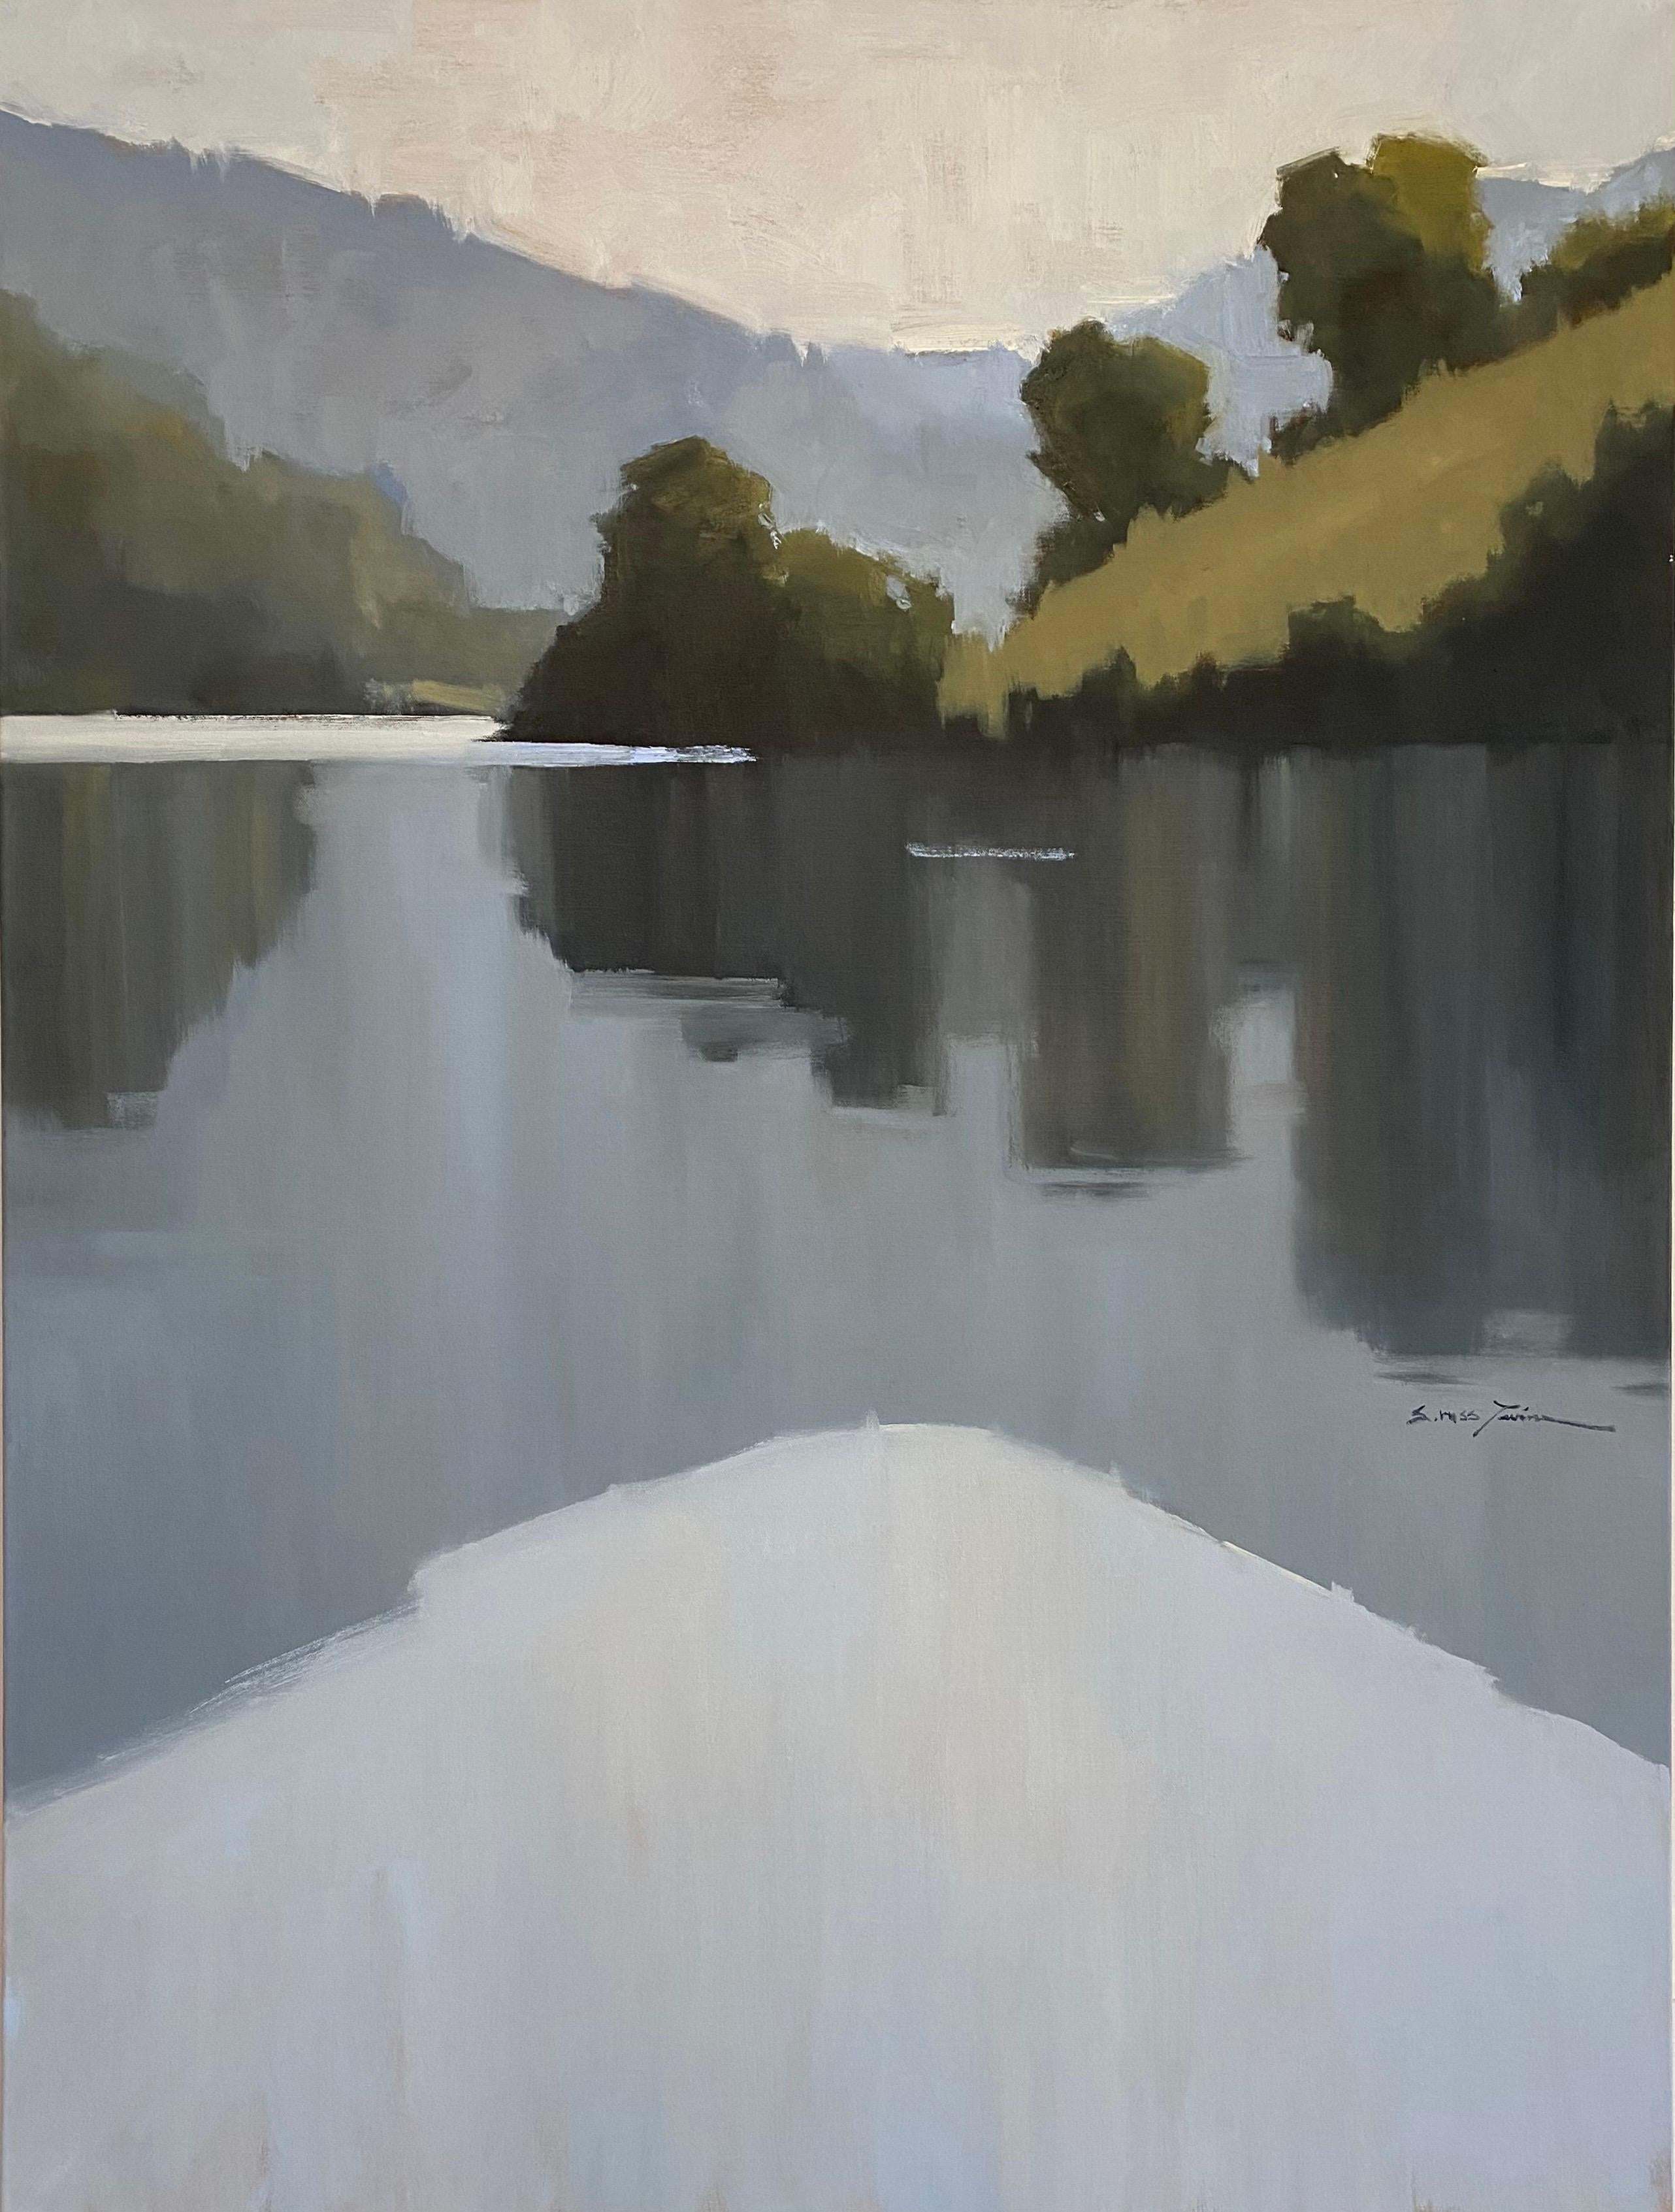 Wistful Moment by Sherrie Russ Levine, Vertical Landscapr Painting 1